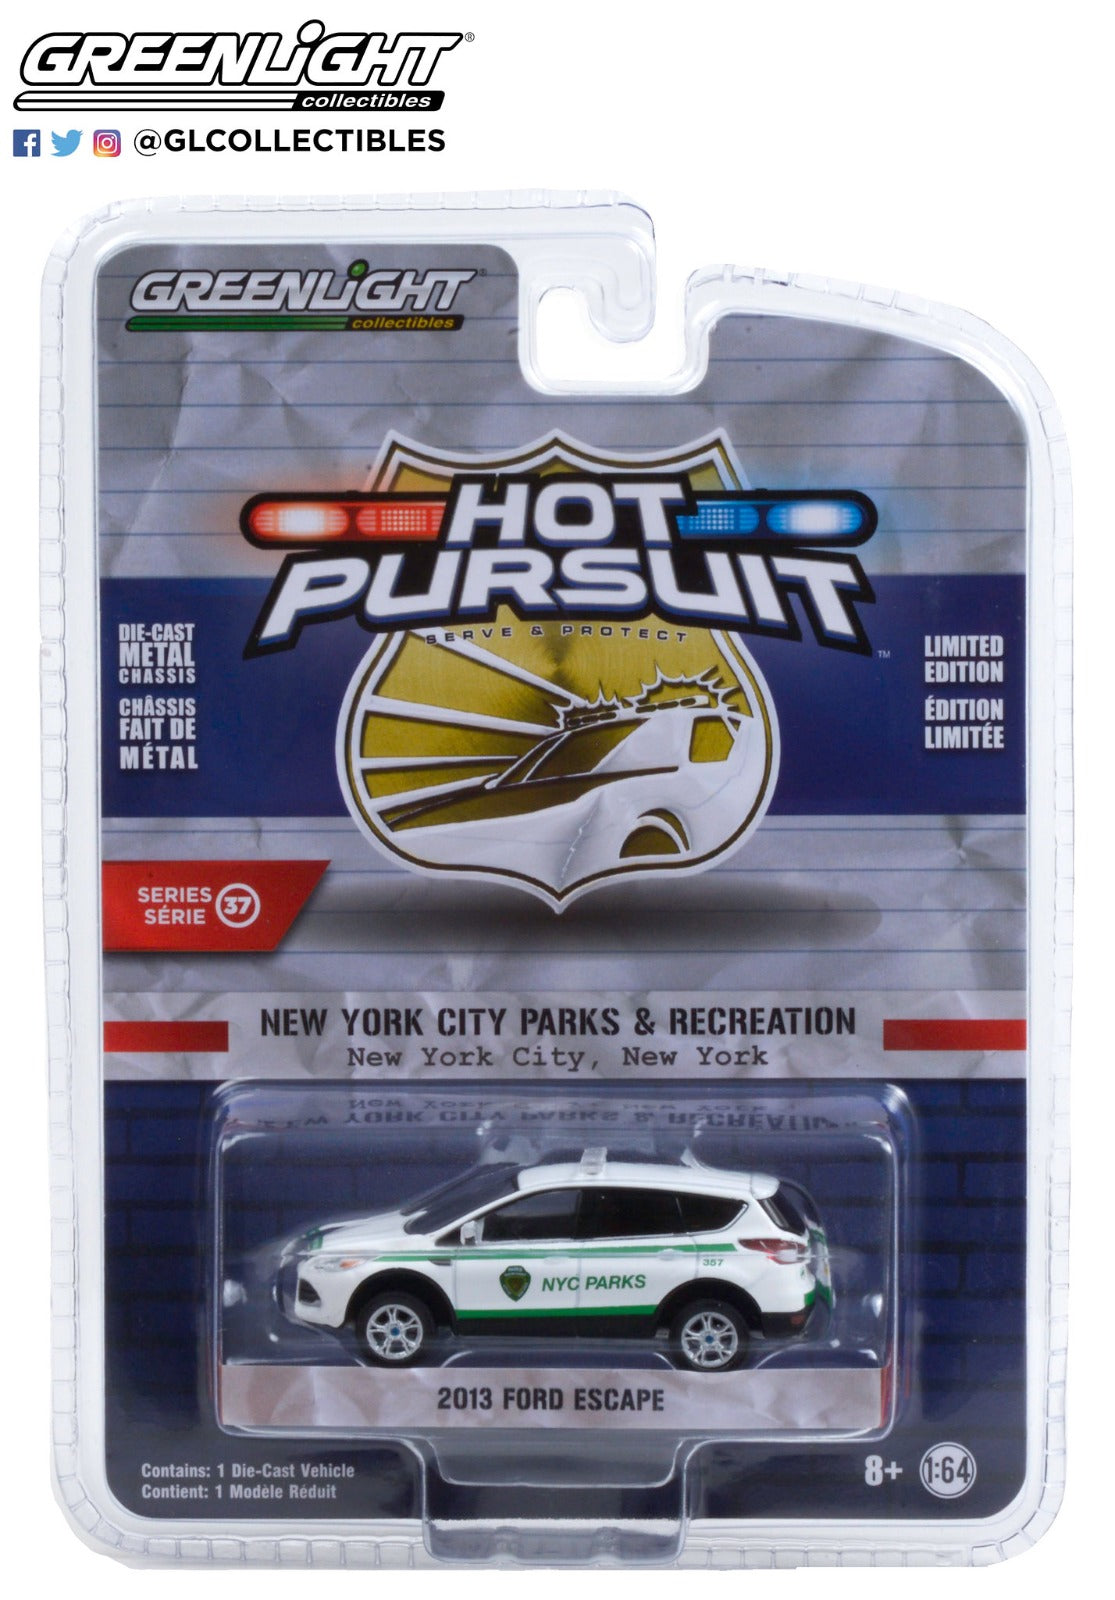 GreenLight 1:64 Hot Pursuit Series 37 - 2013 Ford Escape - New York City Department of Parks & Recreation NYC Parks 42950-D